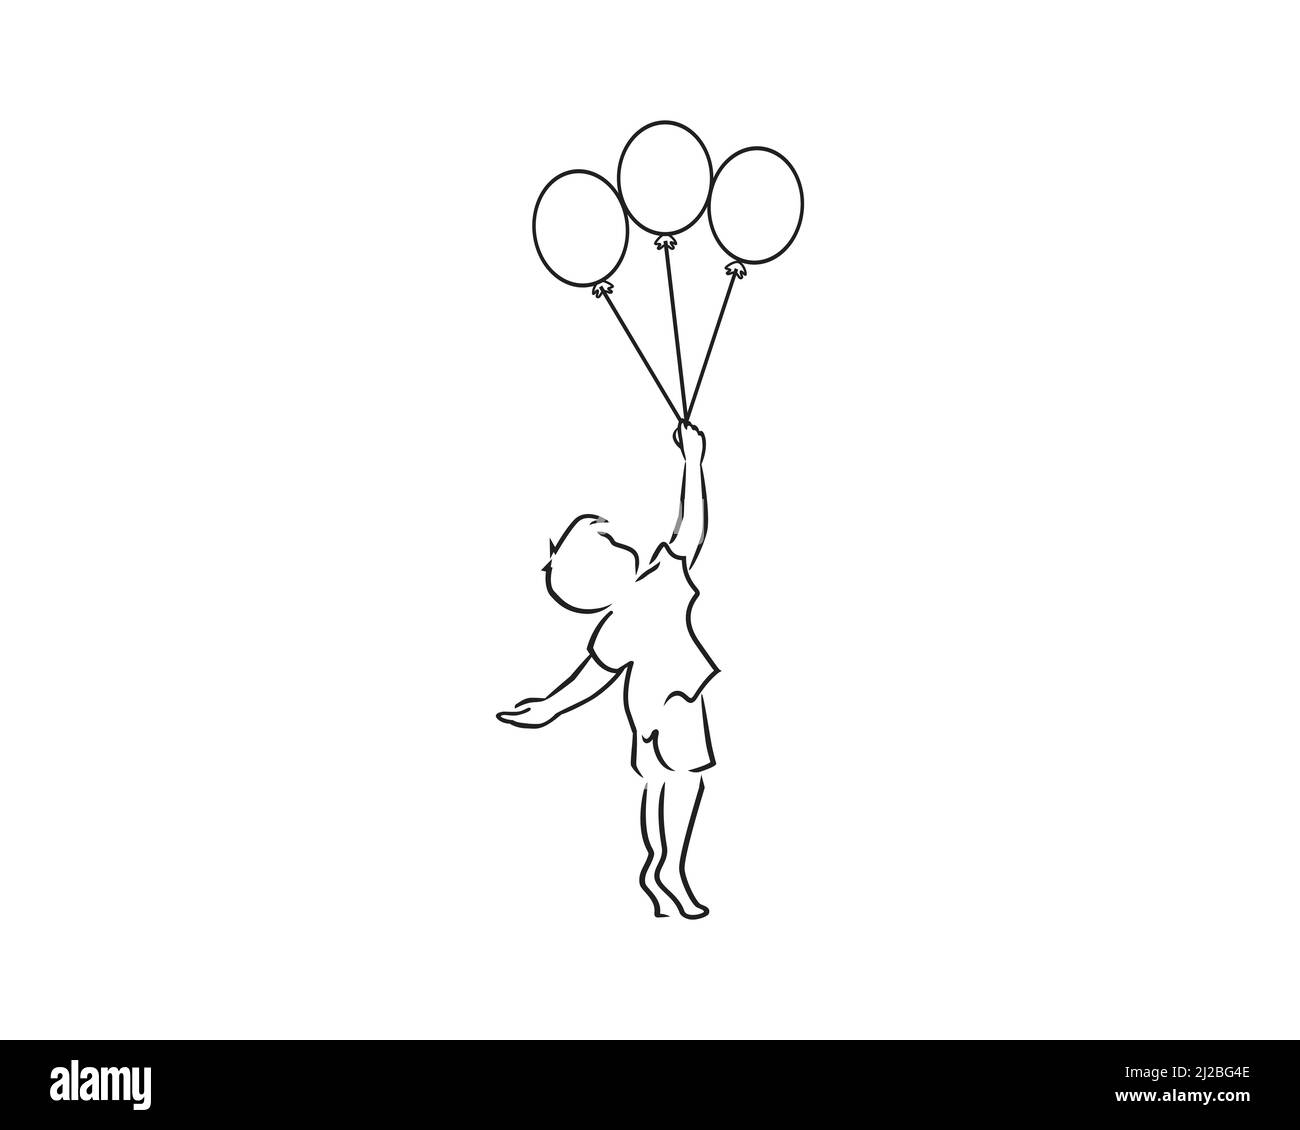 A Young Kid is Holding Flying Balloons Stock Vector